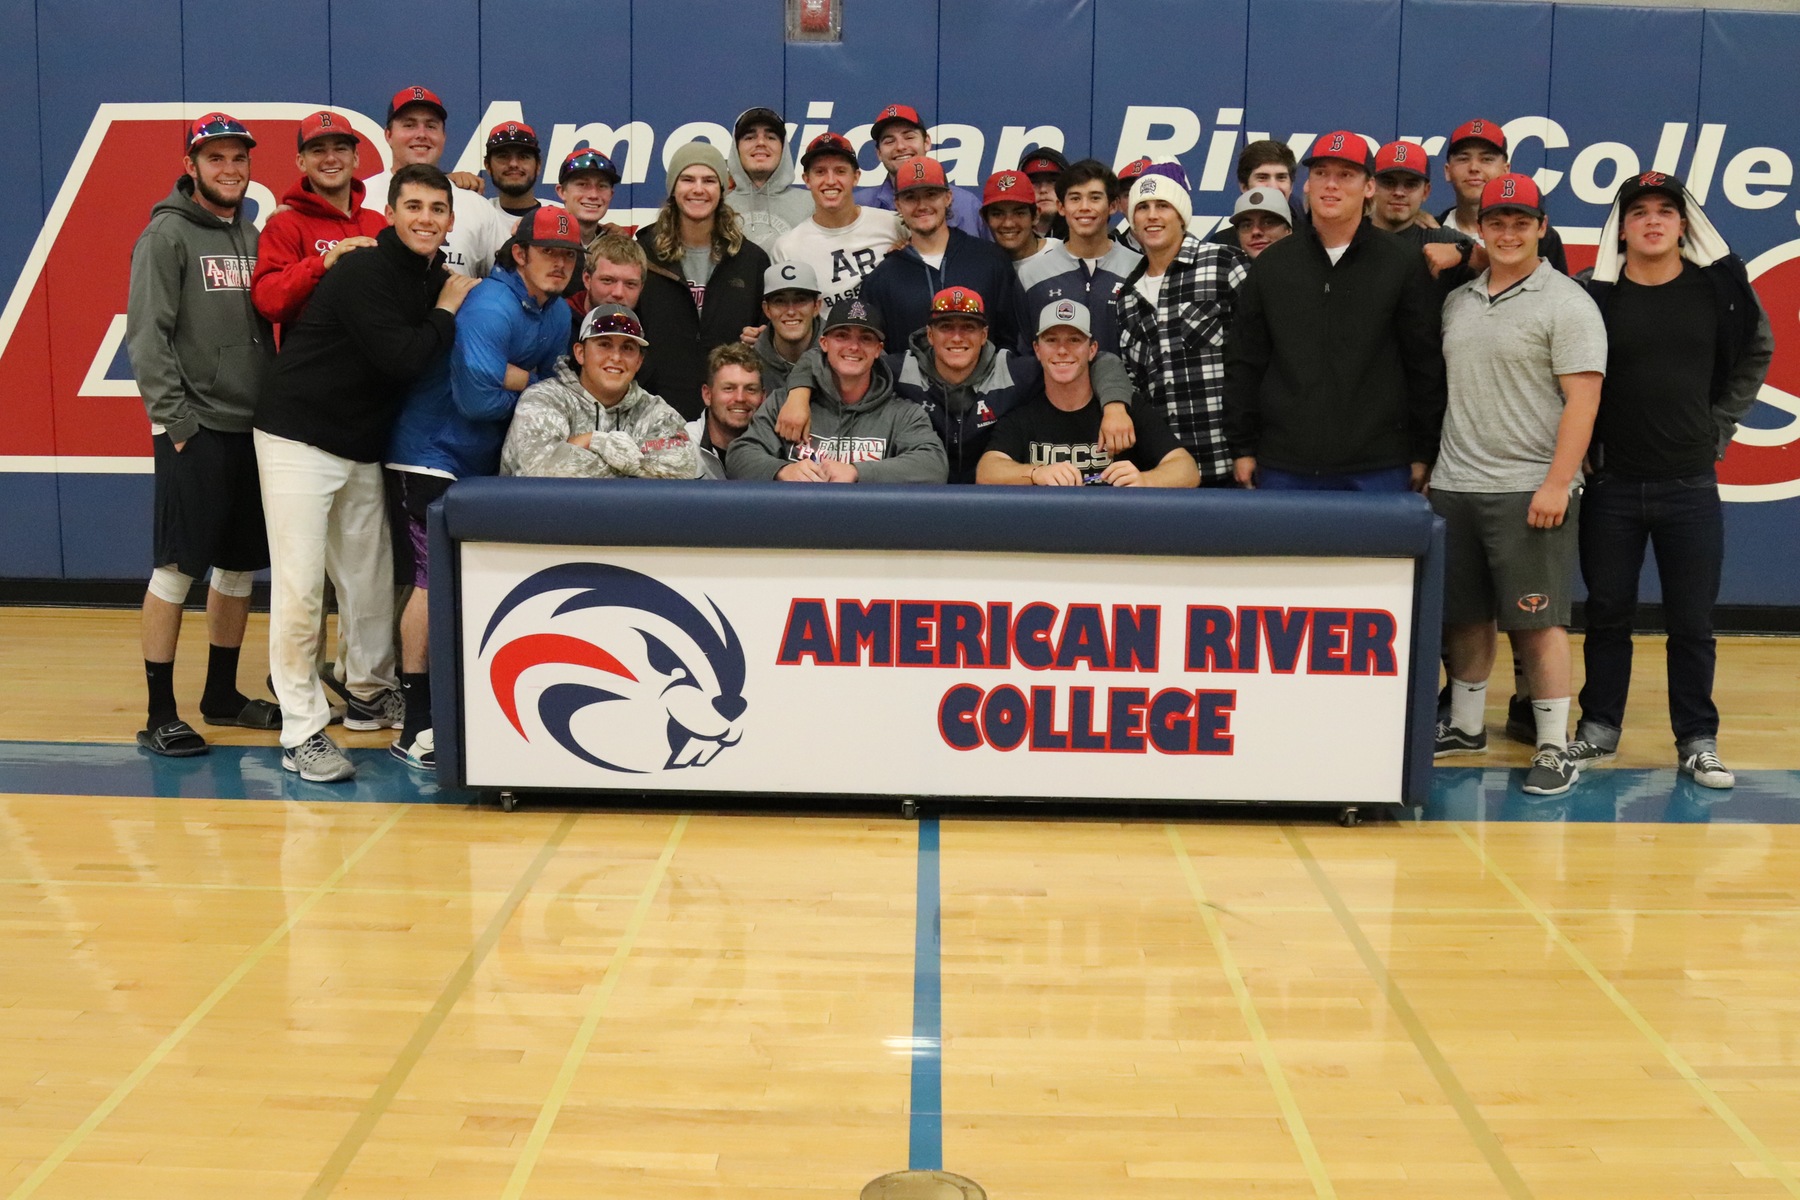 Baseball team picture at signing